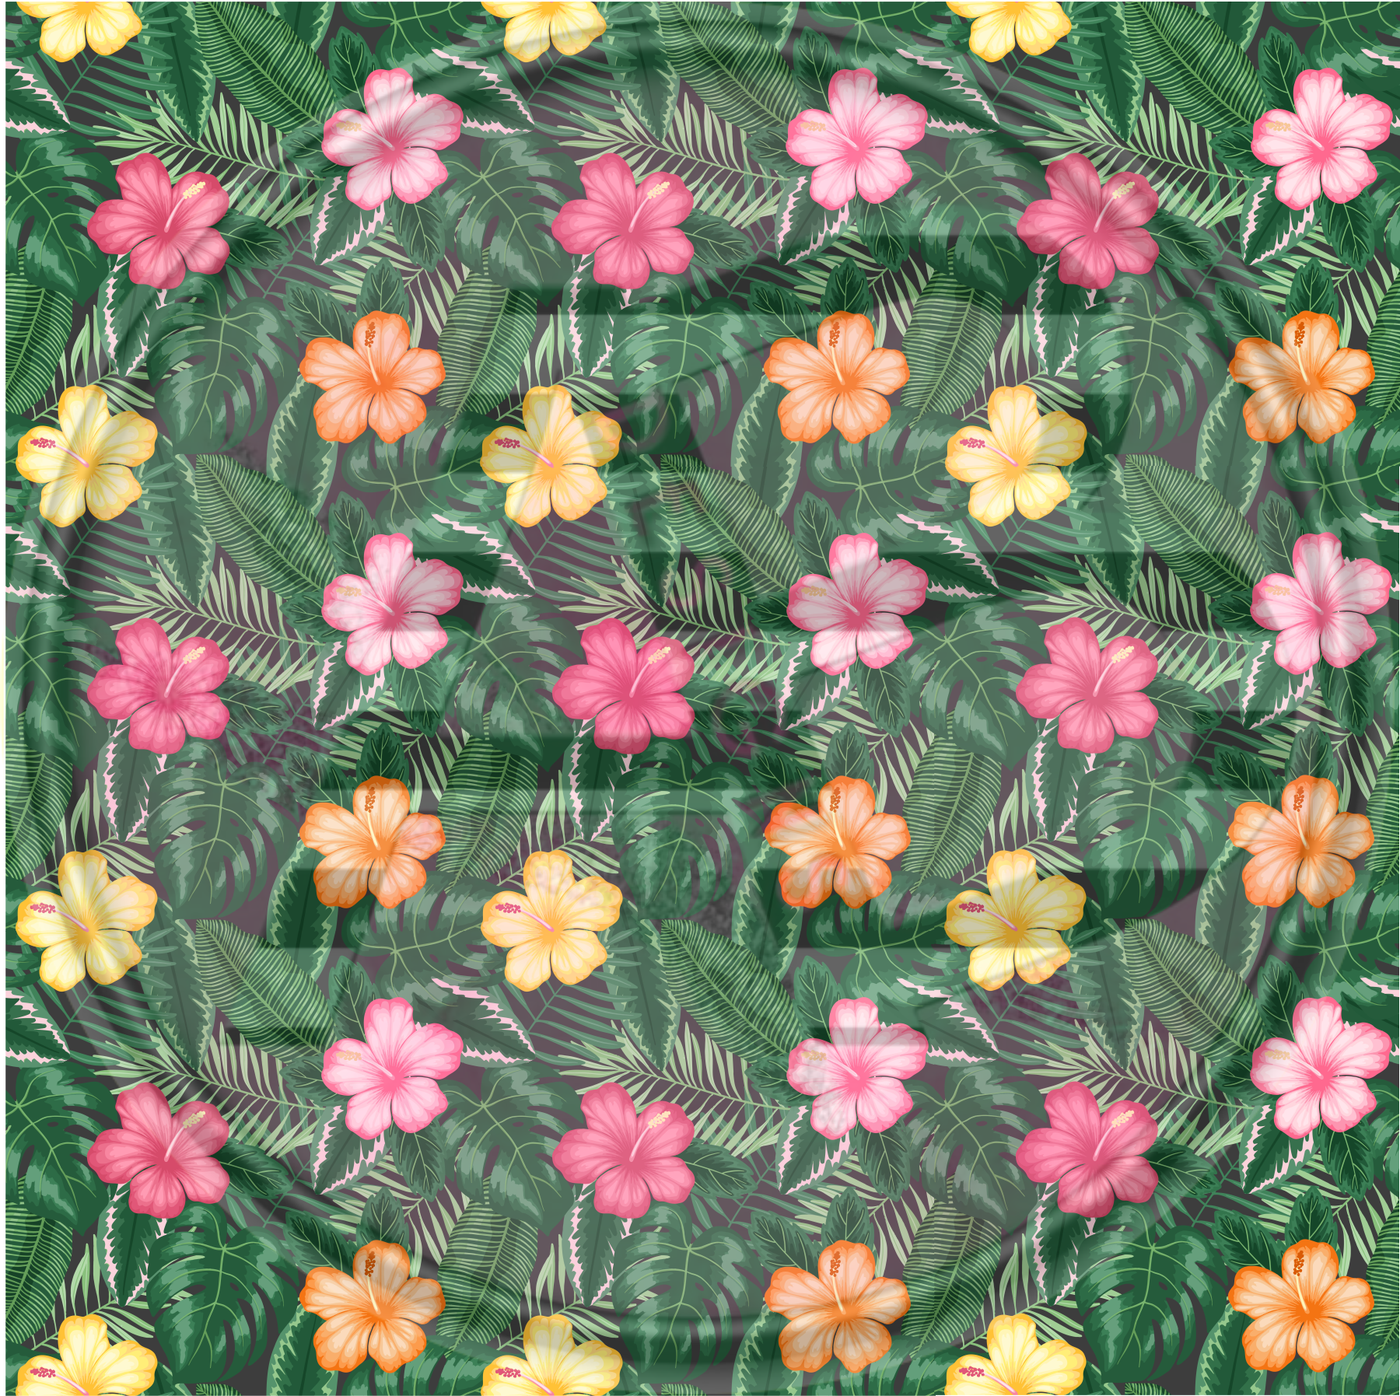 Adhesive Patterned Vinyl - Tropical Exotic Floral 36 SMALLER